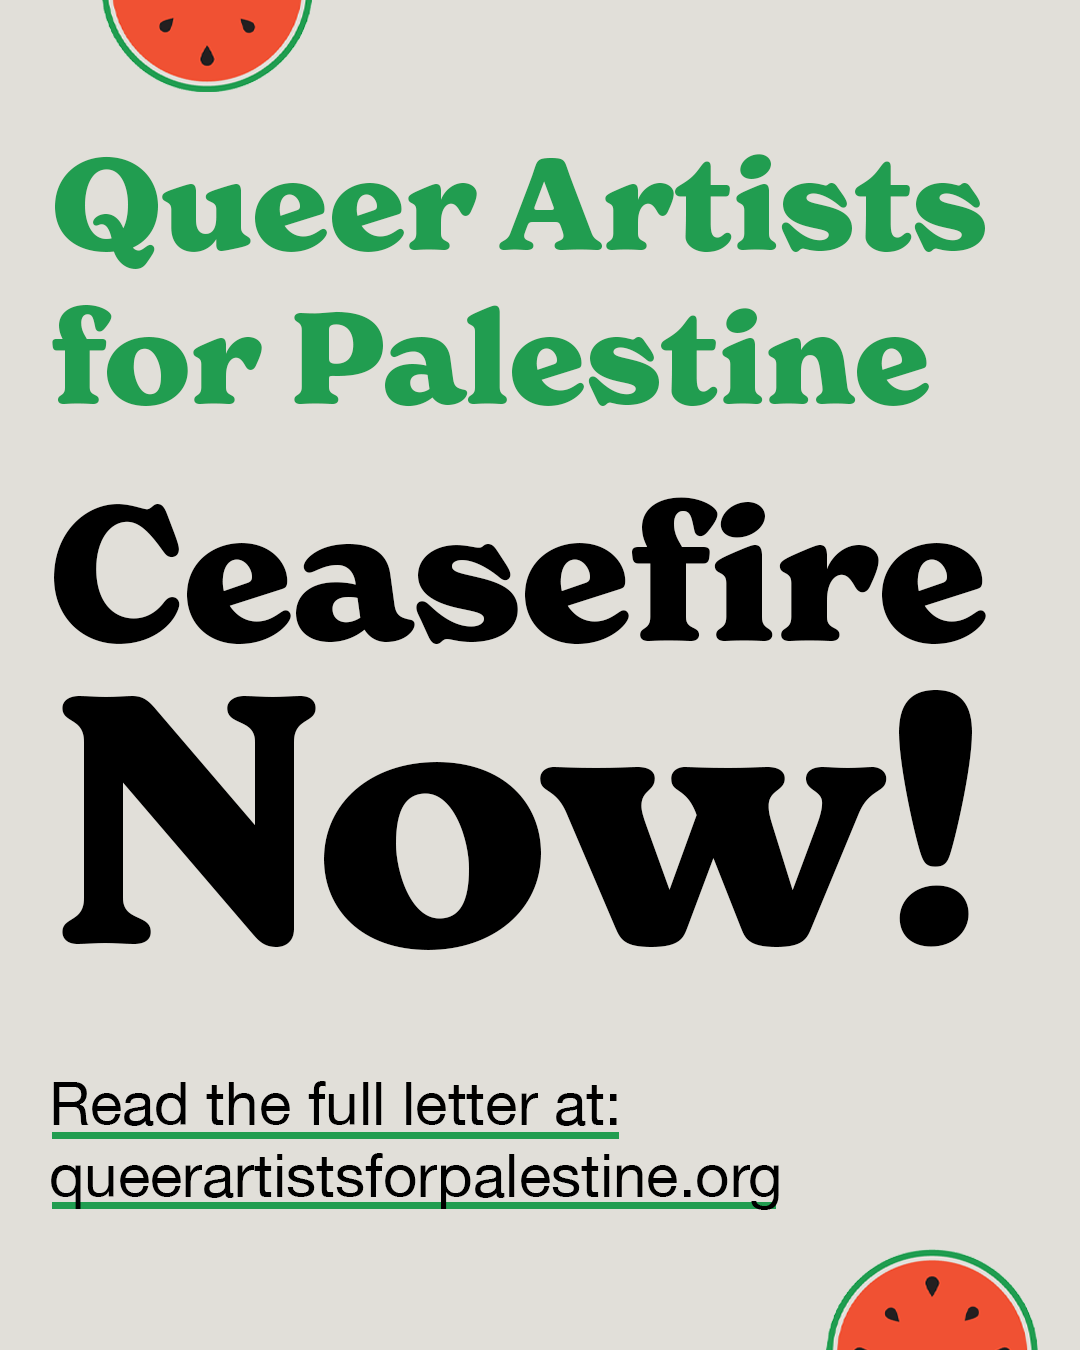 Queer Artists for Palestine. Ceasefire Now! Read the full letter at: queerartistsforpalestine.org